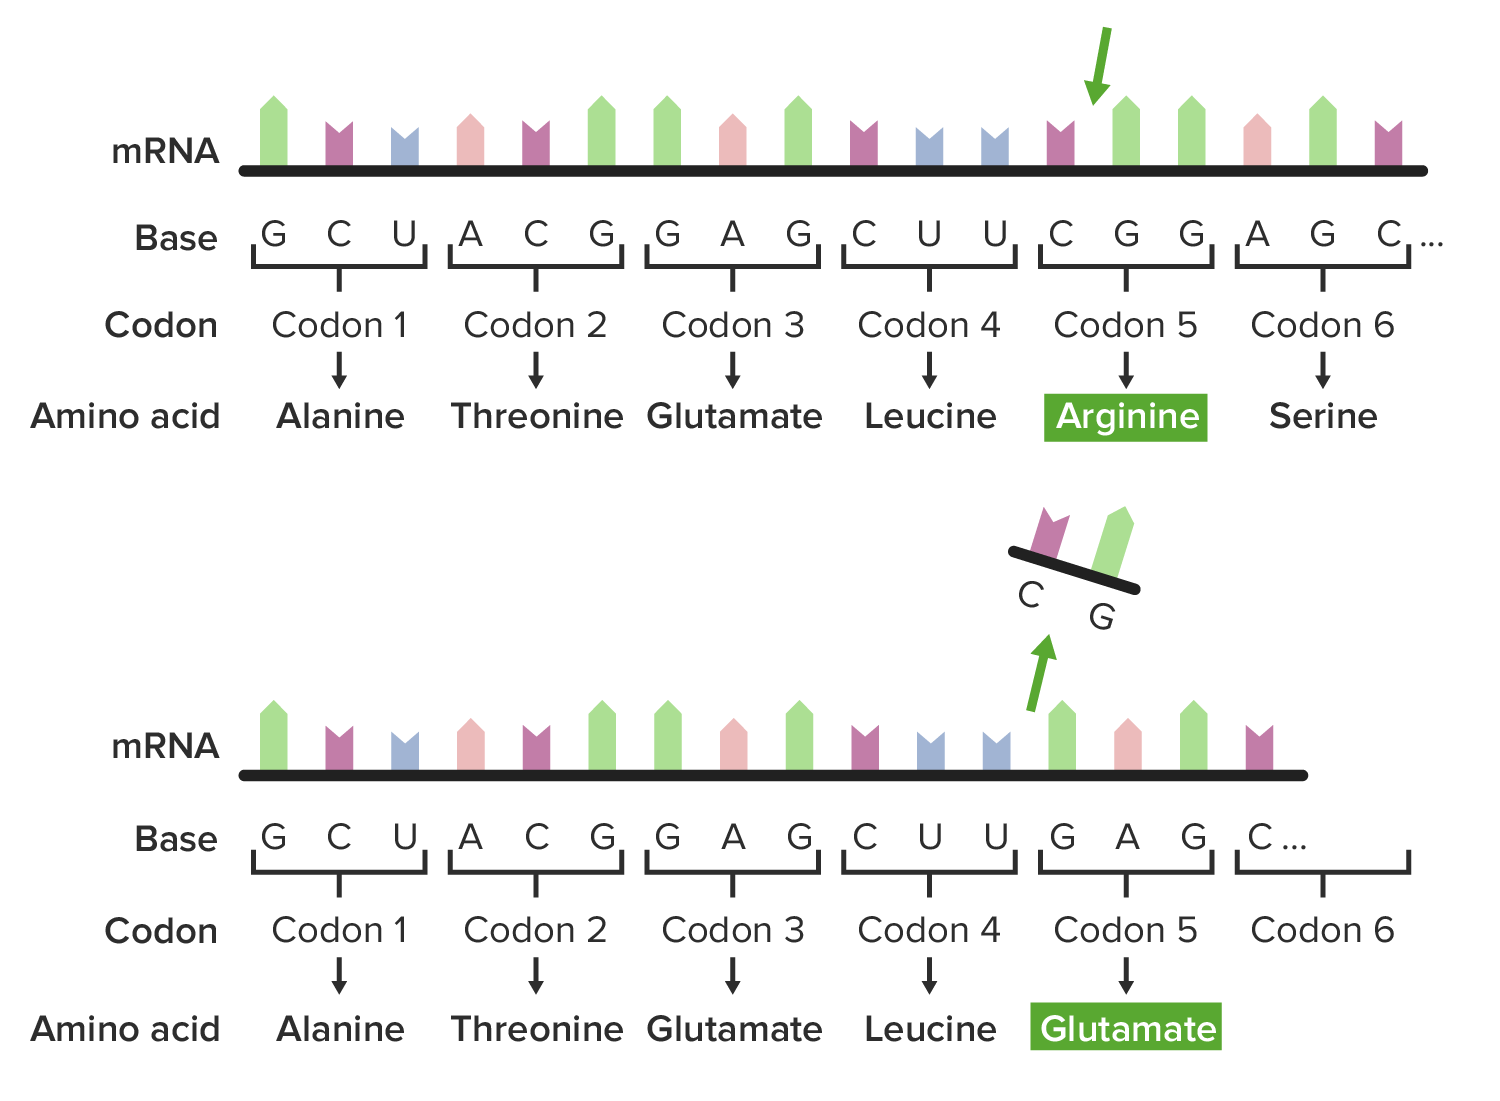 Frameshift mutation wherein deletion of cg alters the amino acid sequence